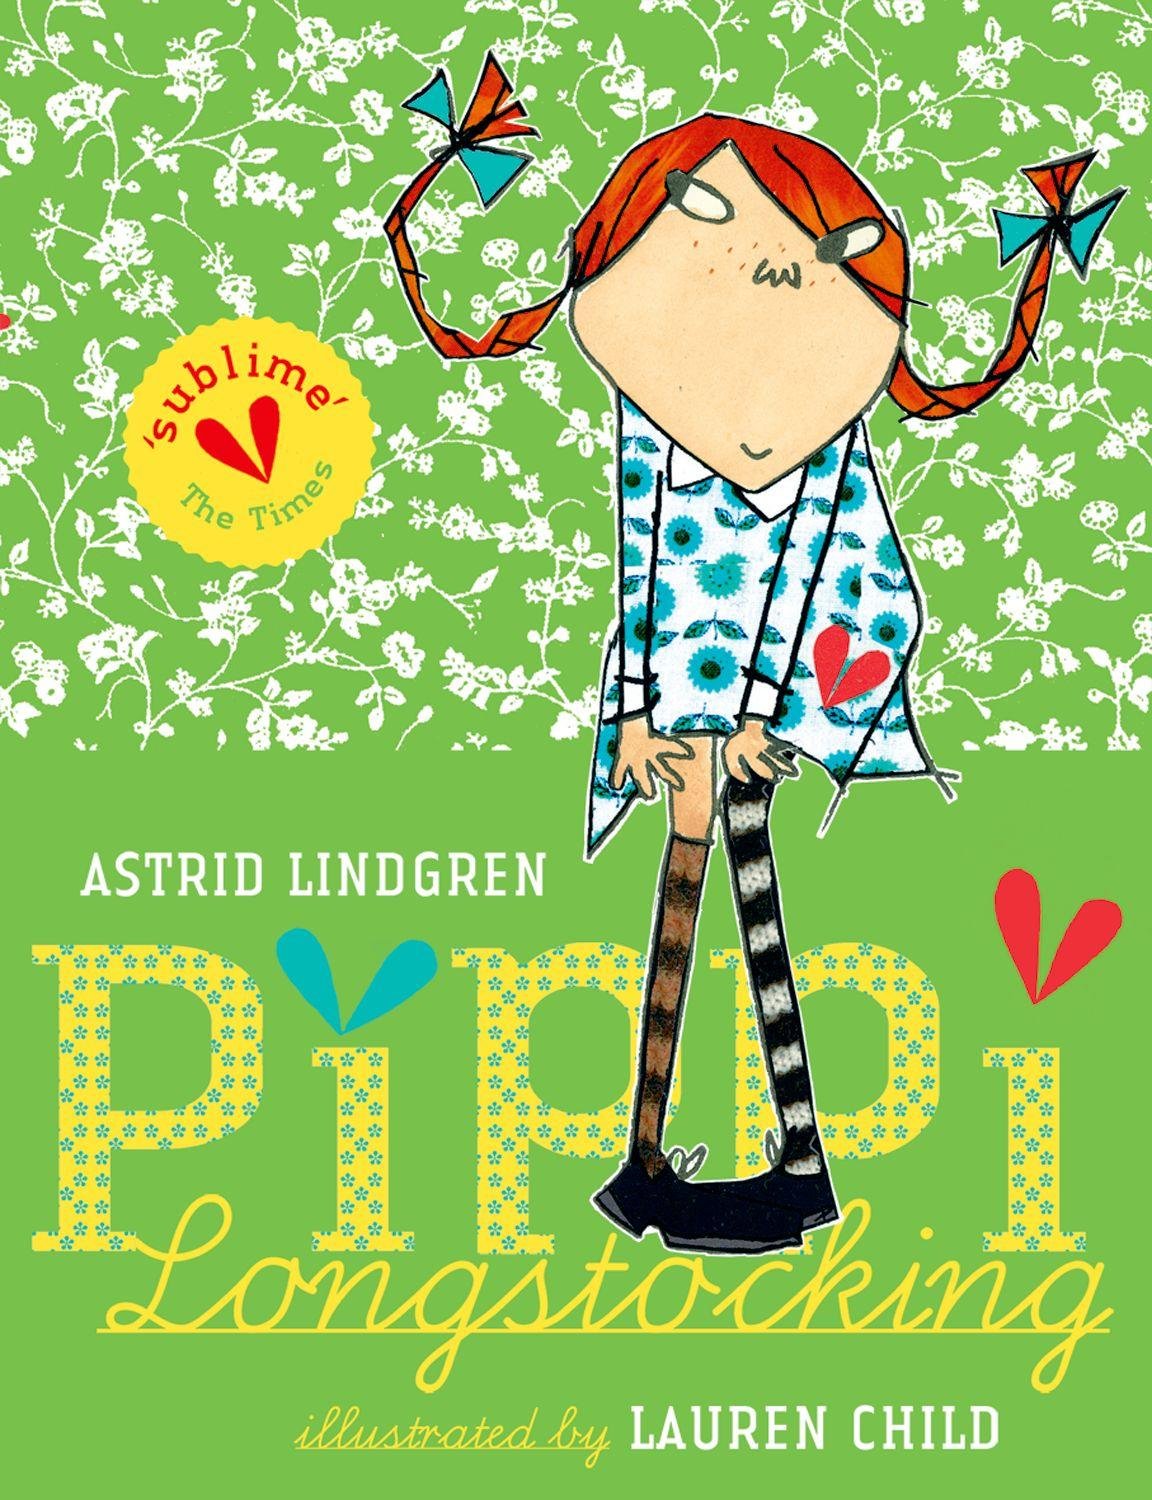 Pippi Longstocking written by Astrid Lindgren translated by Tiina Nunnally illustrated by Lauren Child